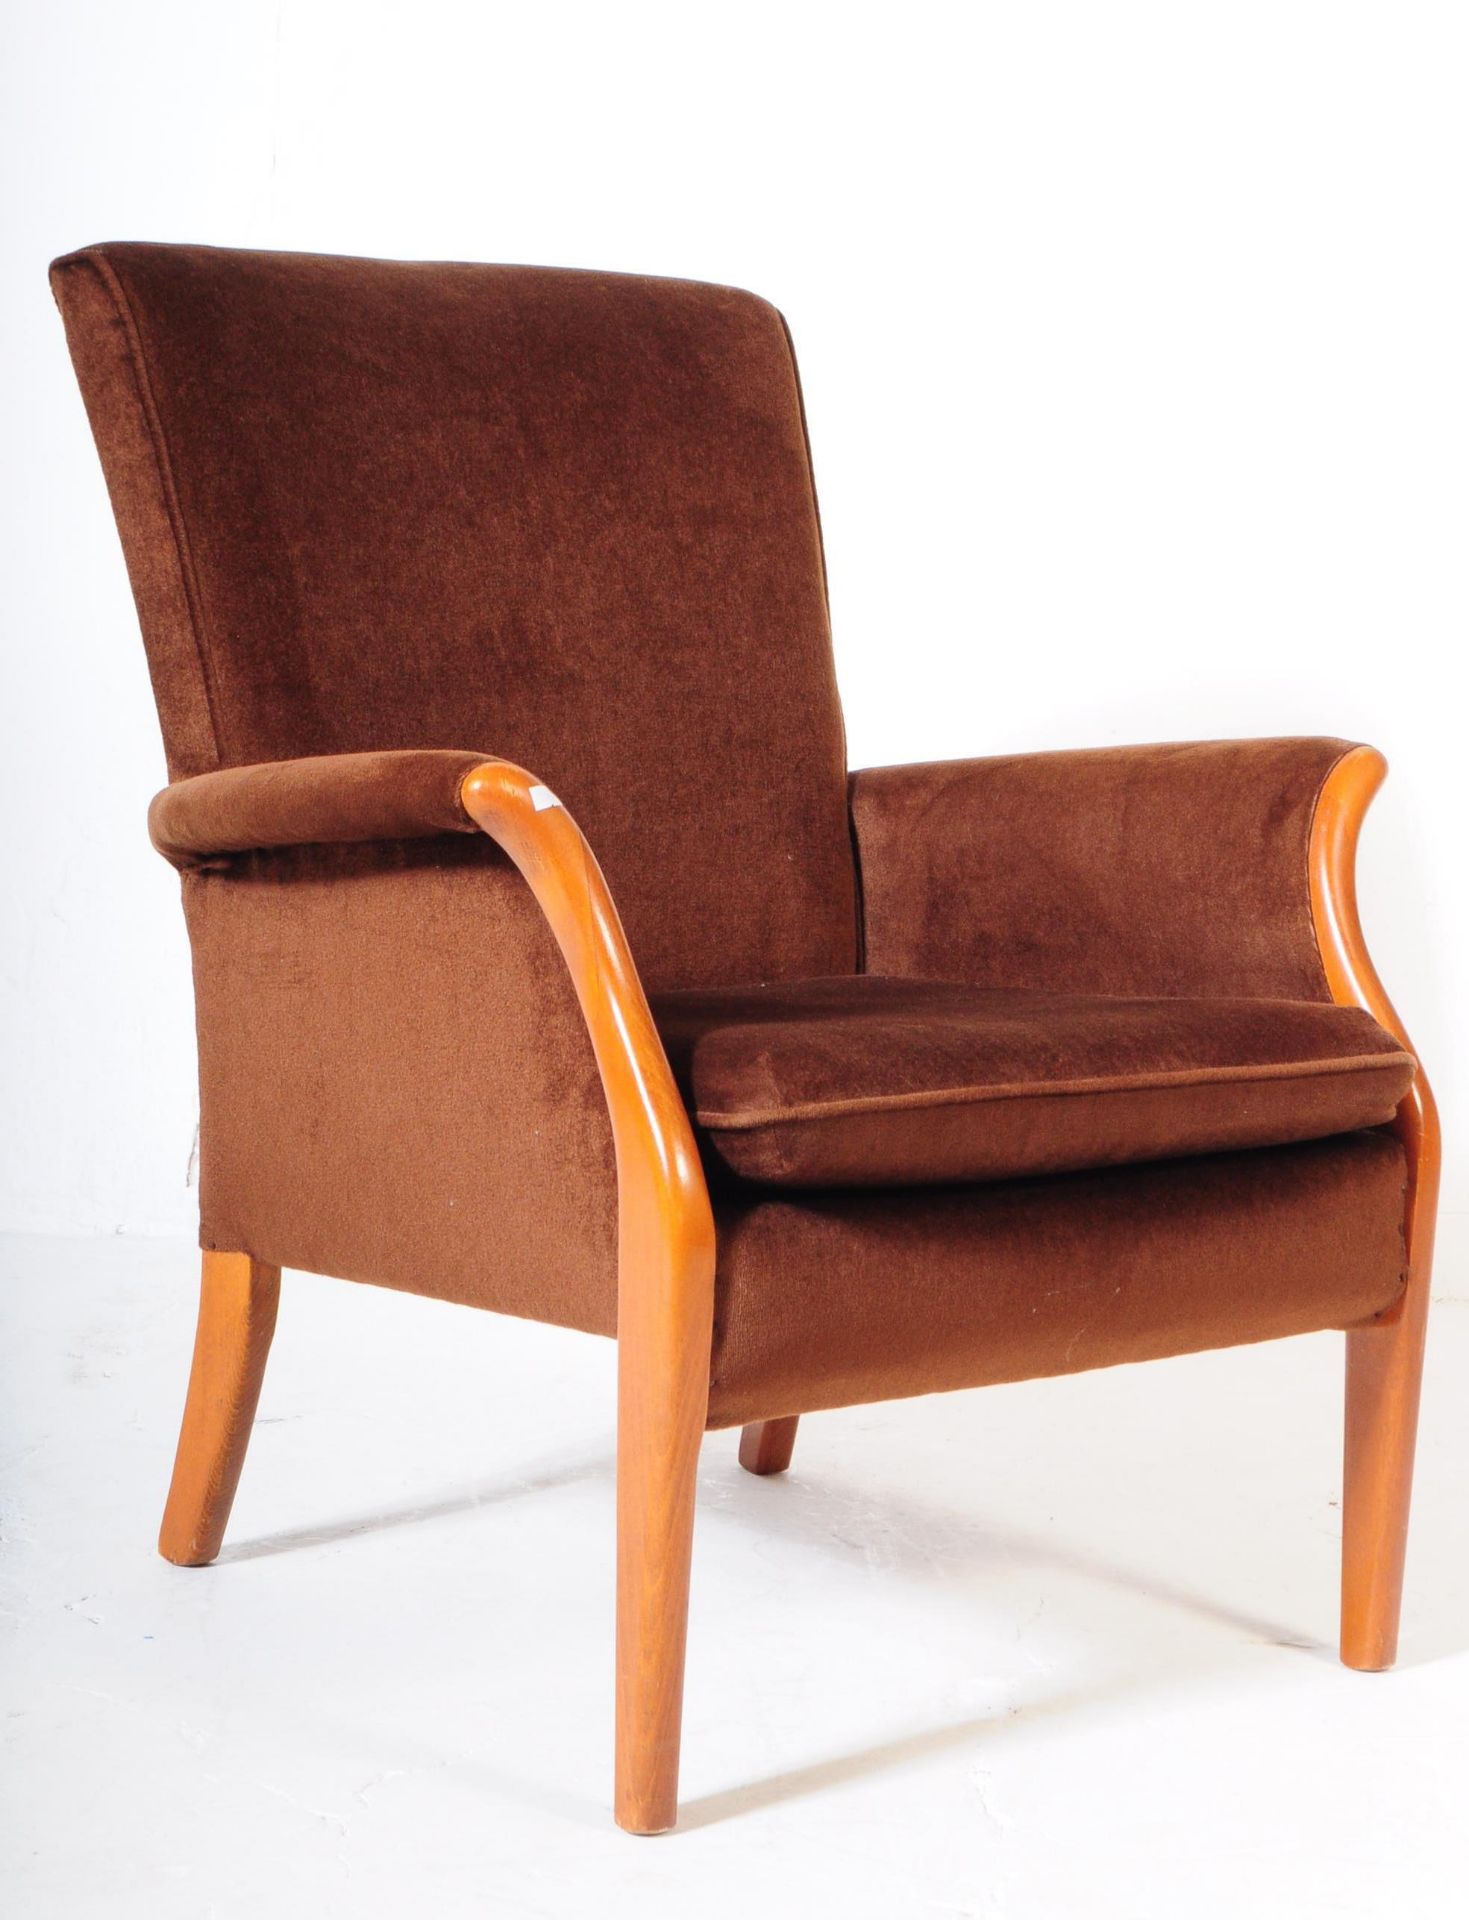 PARKER KNOLL - PAIR OF MID CENTURY ARMCHAIRS - Image 3 of 6